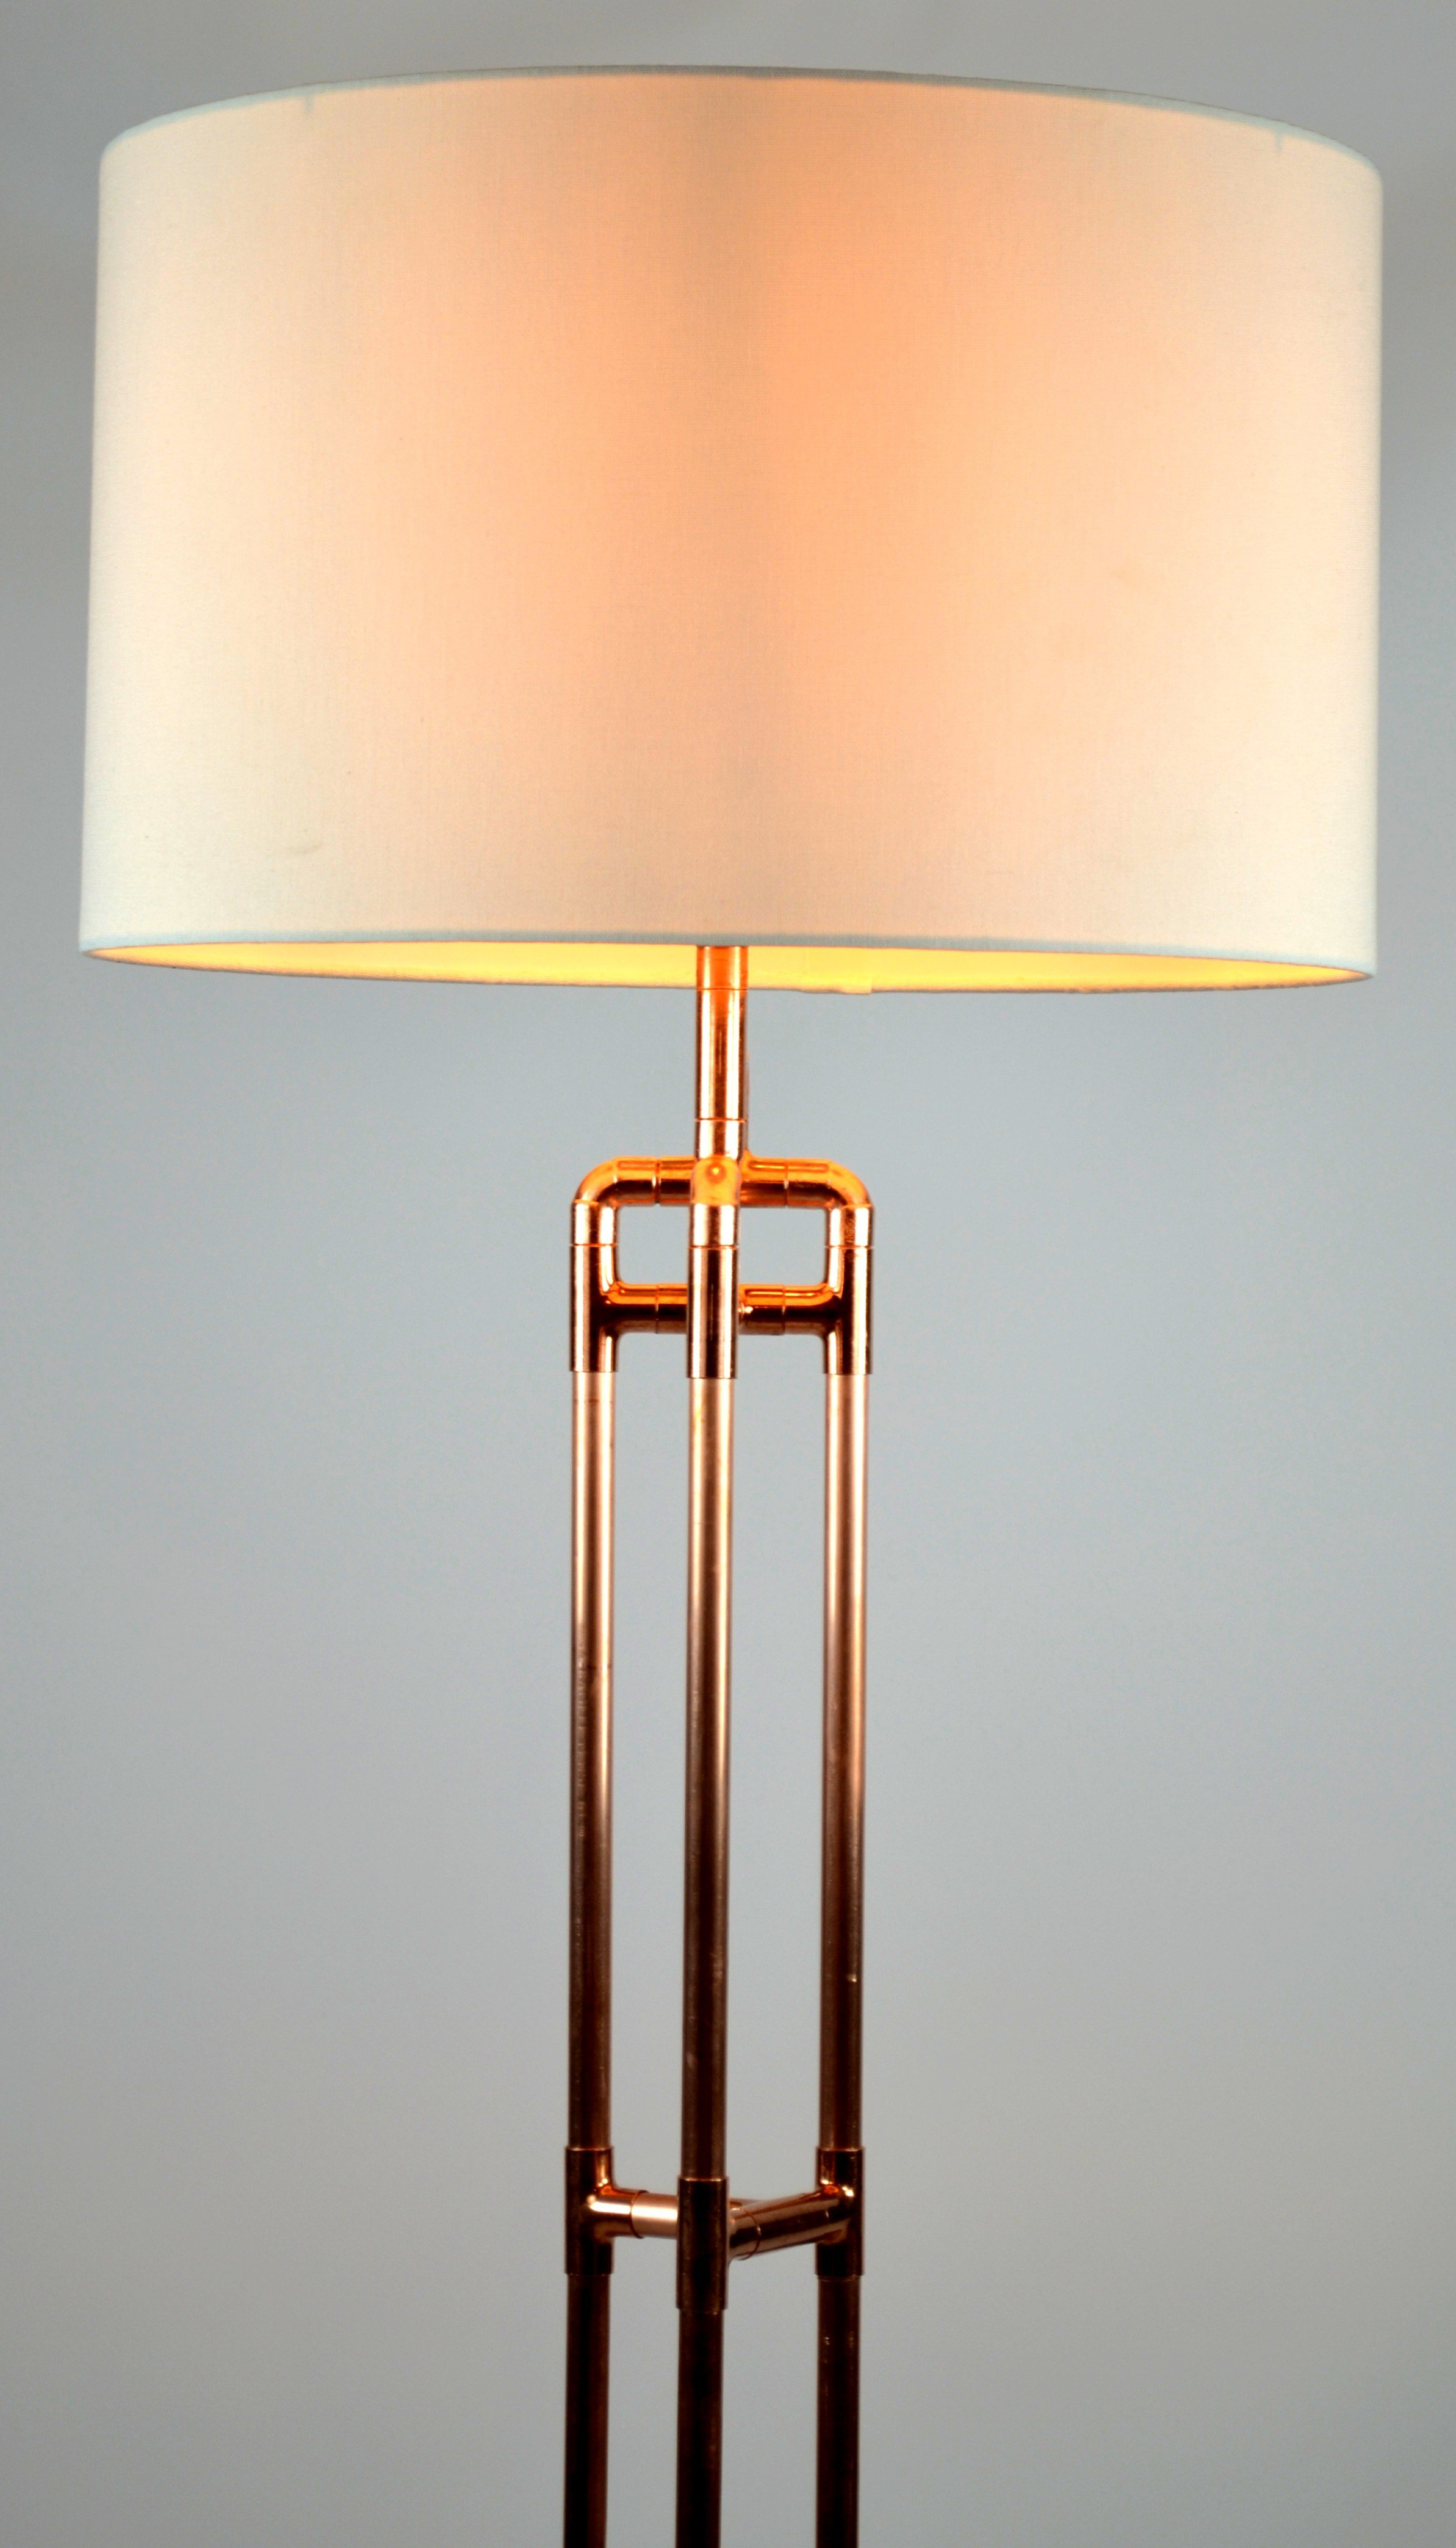 Tri Tower Copper Floor Lamp Base in dimensions 2386 X 4175